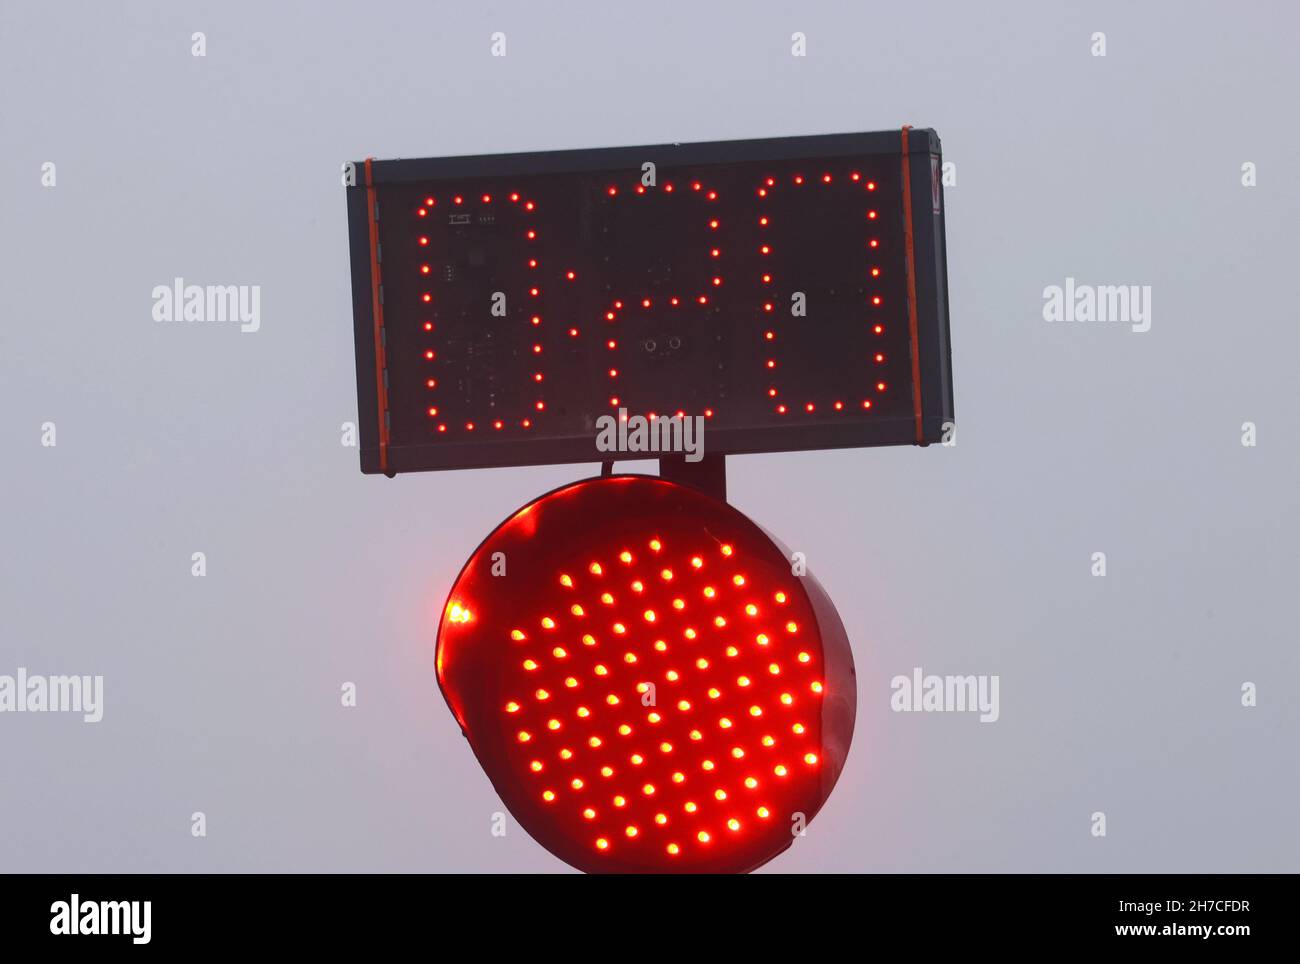 Obsteig, Austria. 22nd Nov, 2021. At a traffic light the remaining red phase is displayed with 20 seconds. For 20 days at first, Austria will go into a lockdown again from Monday due to the massive fourth Corona wave. Credit: Karl-Josef Hildenbrand/dpa/Alamy Live News Stock Photo